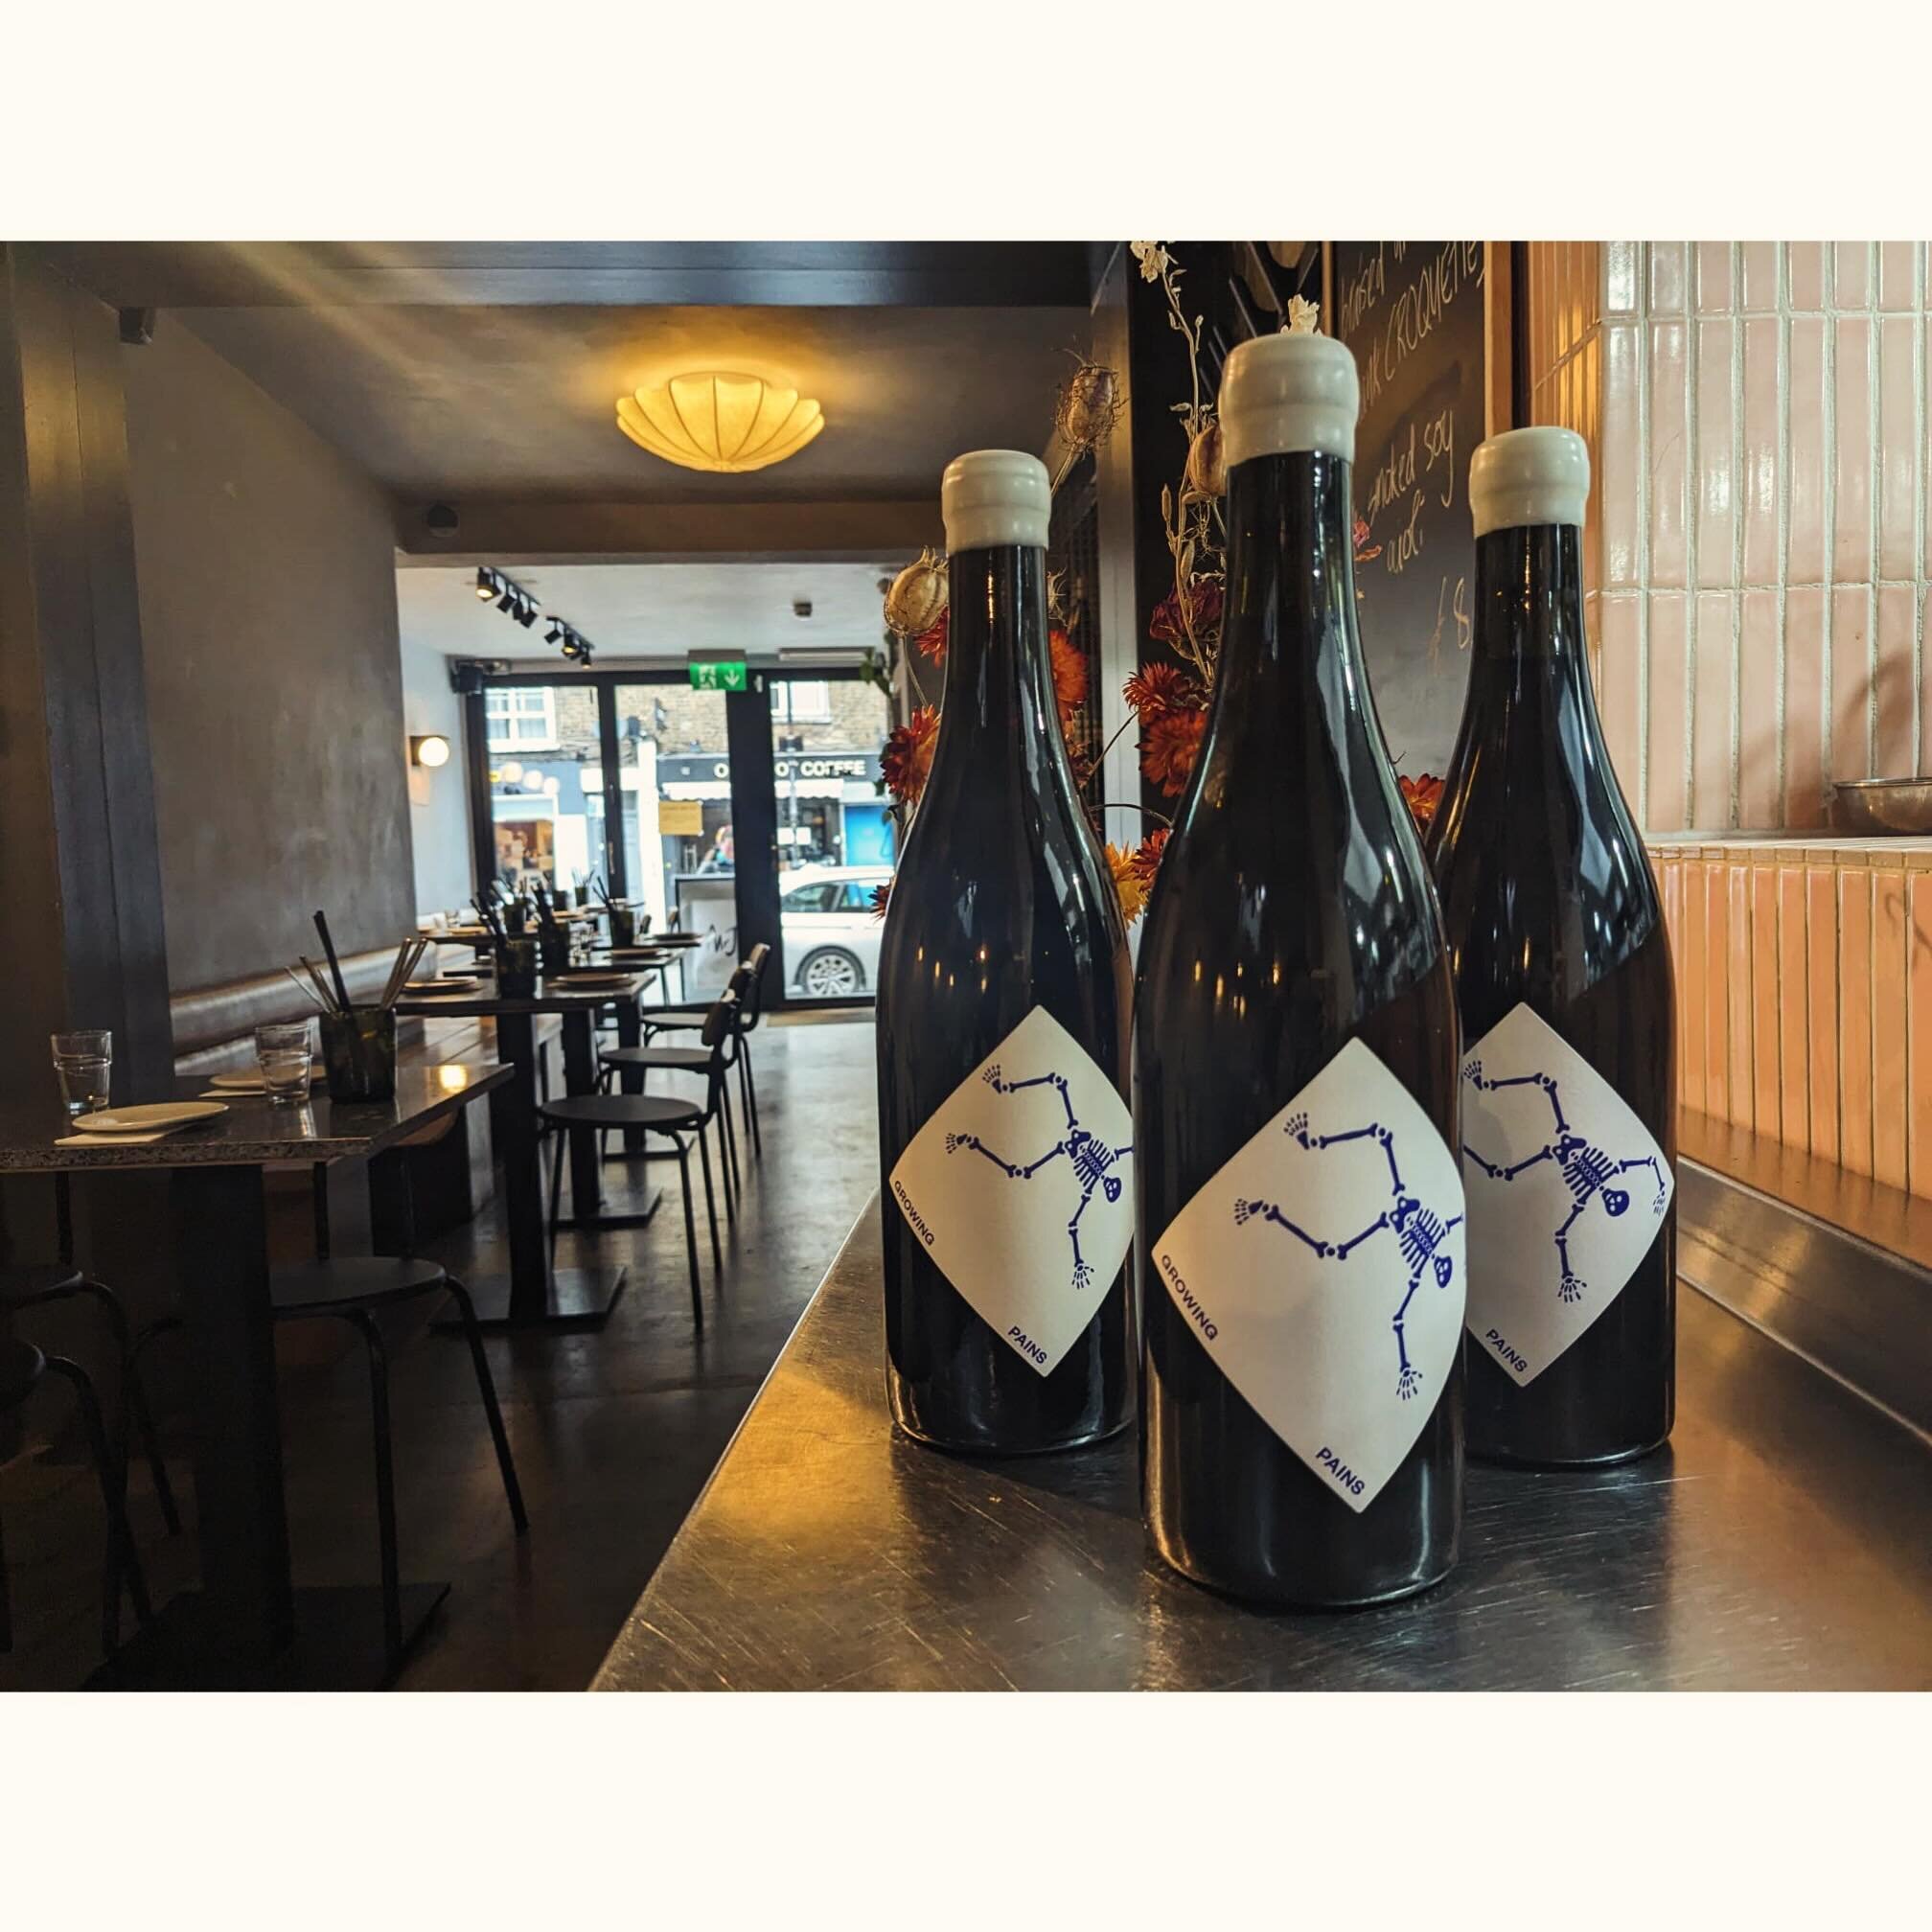 New on the menu this weekend Growing Pains, Cinsault from our friends @drinknewtheory wines, got it on by the bottle @mrjirestaurant